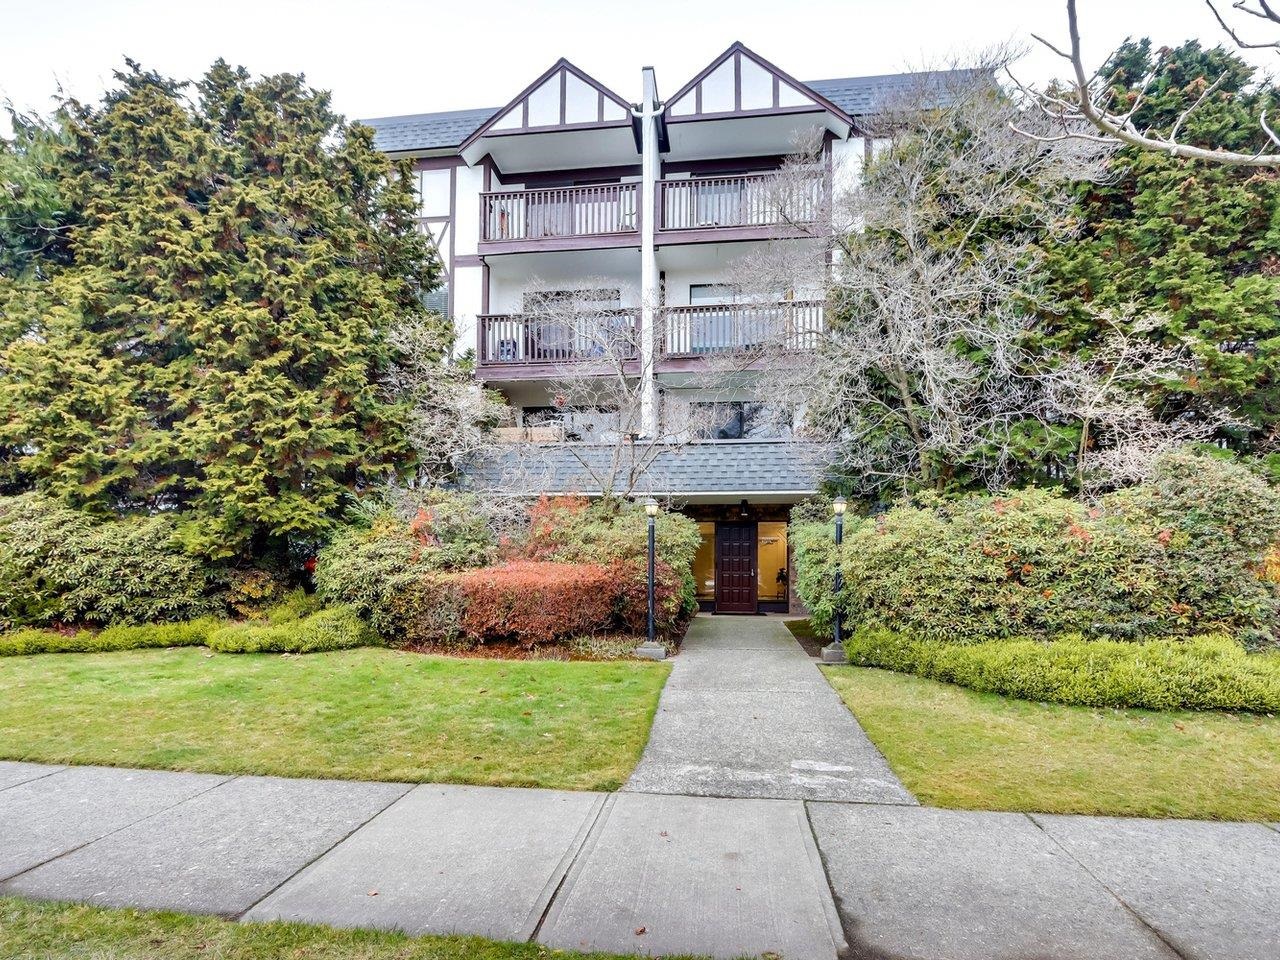 #209, 310 E. 3rd St., West Vancouver, British Columbia